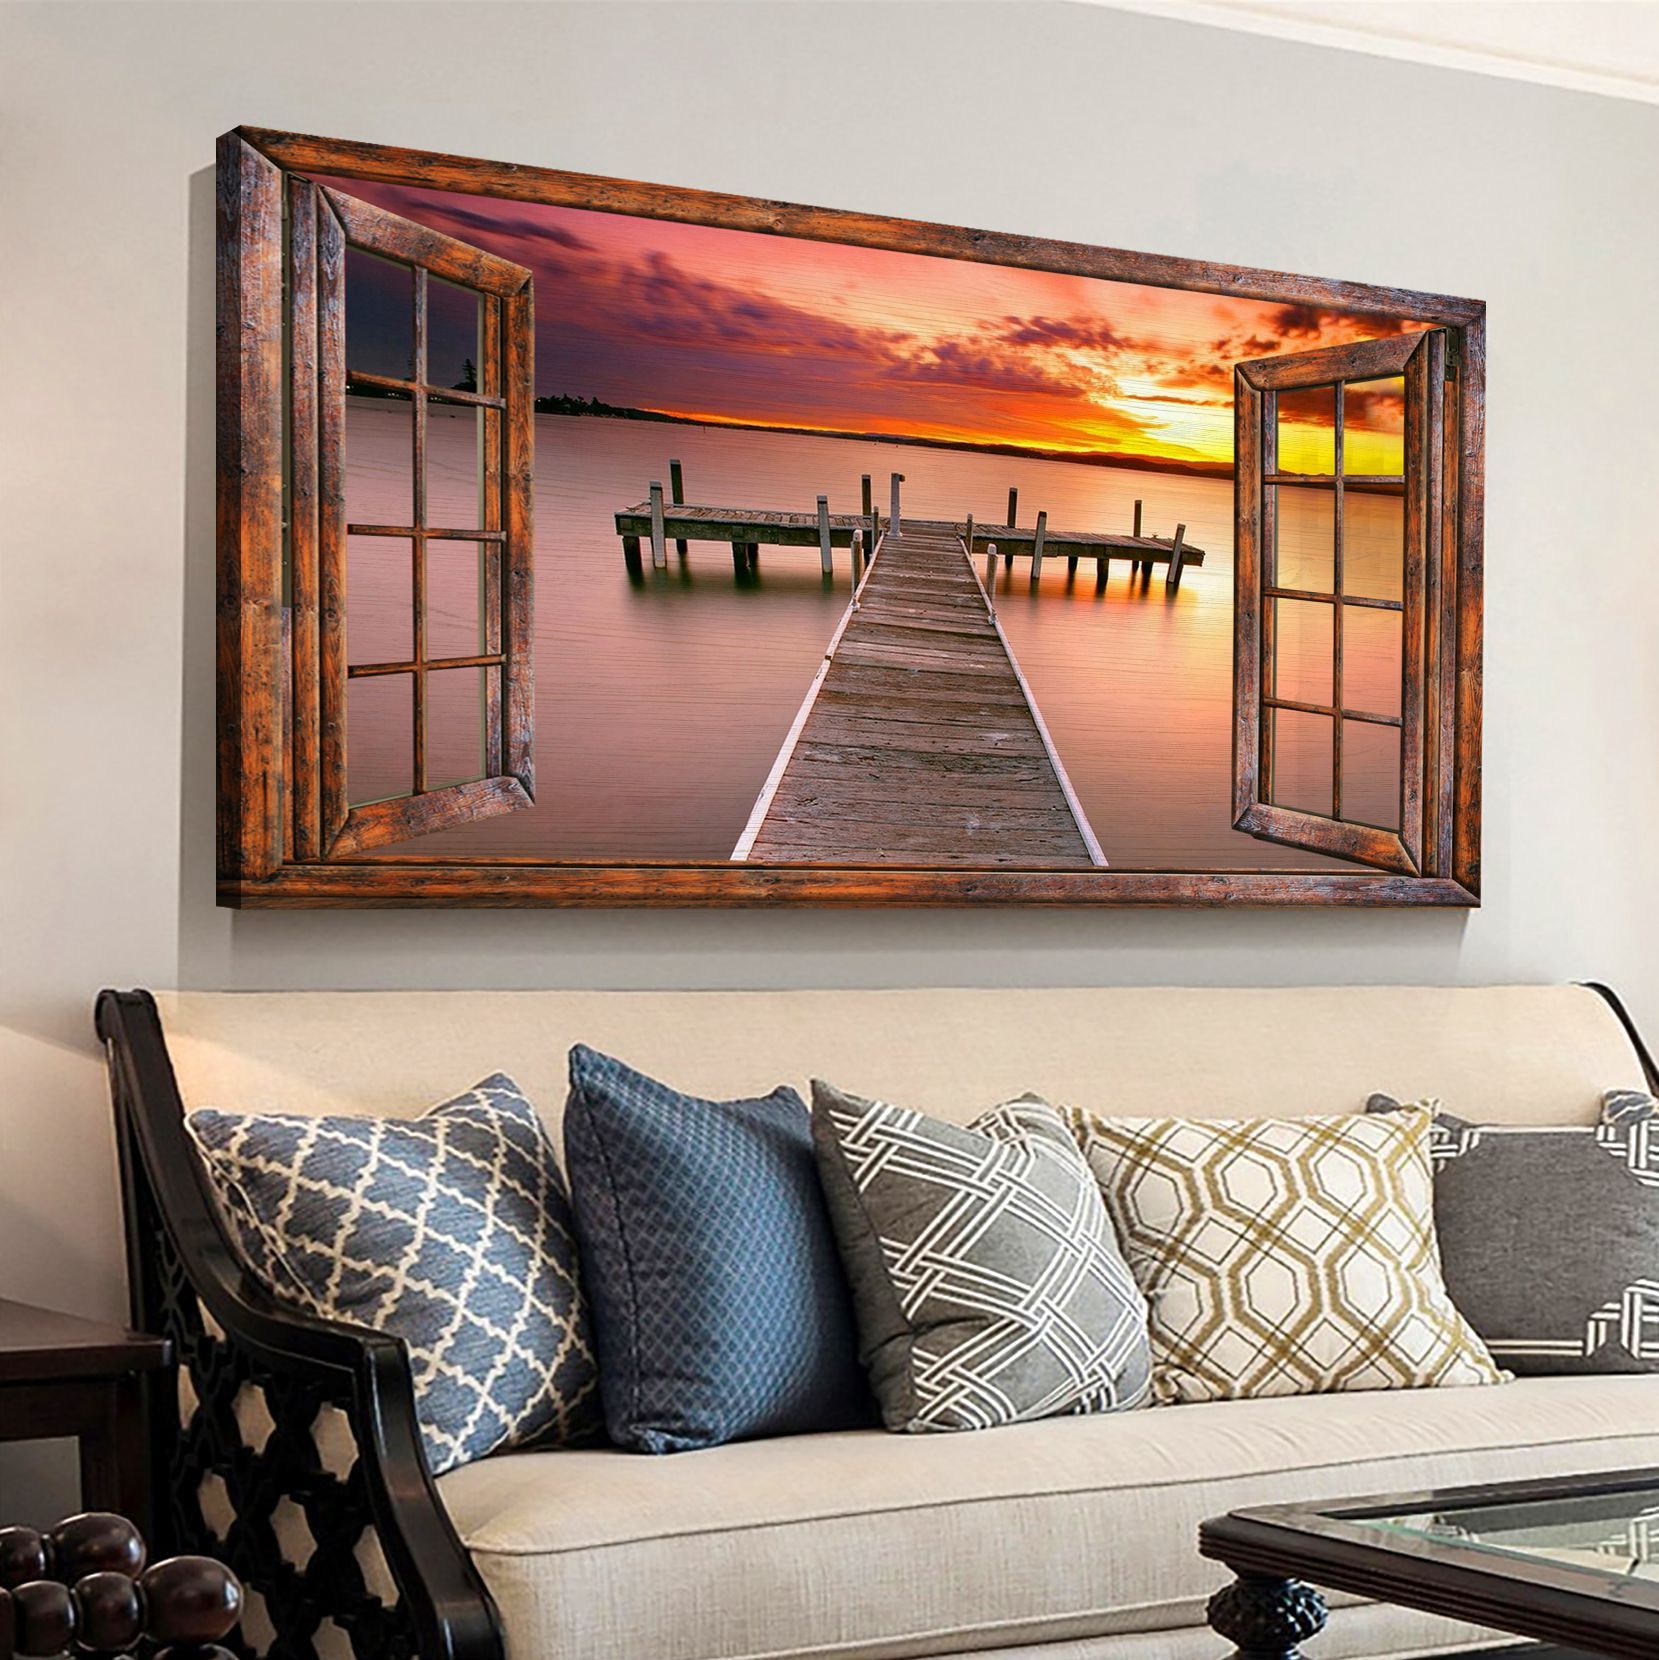 Faux Window Canvas Prints Beautiful Pier In Lake At Sunset Nature Decor With Sunset Wall Art (View 1 of 15)